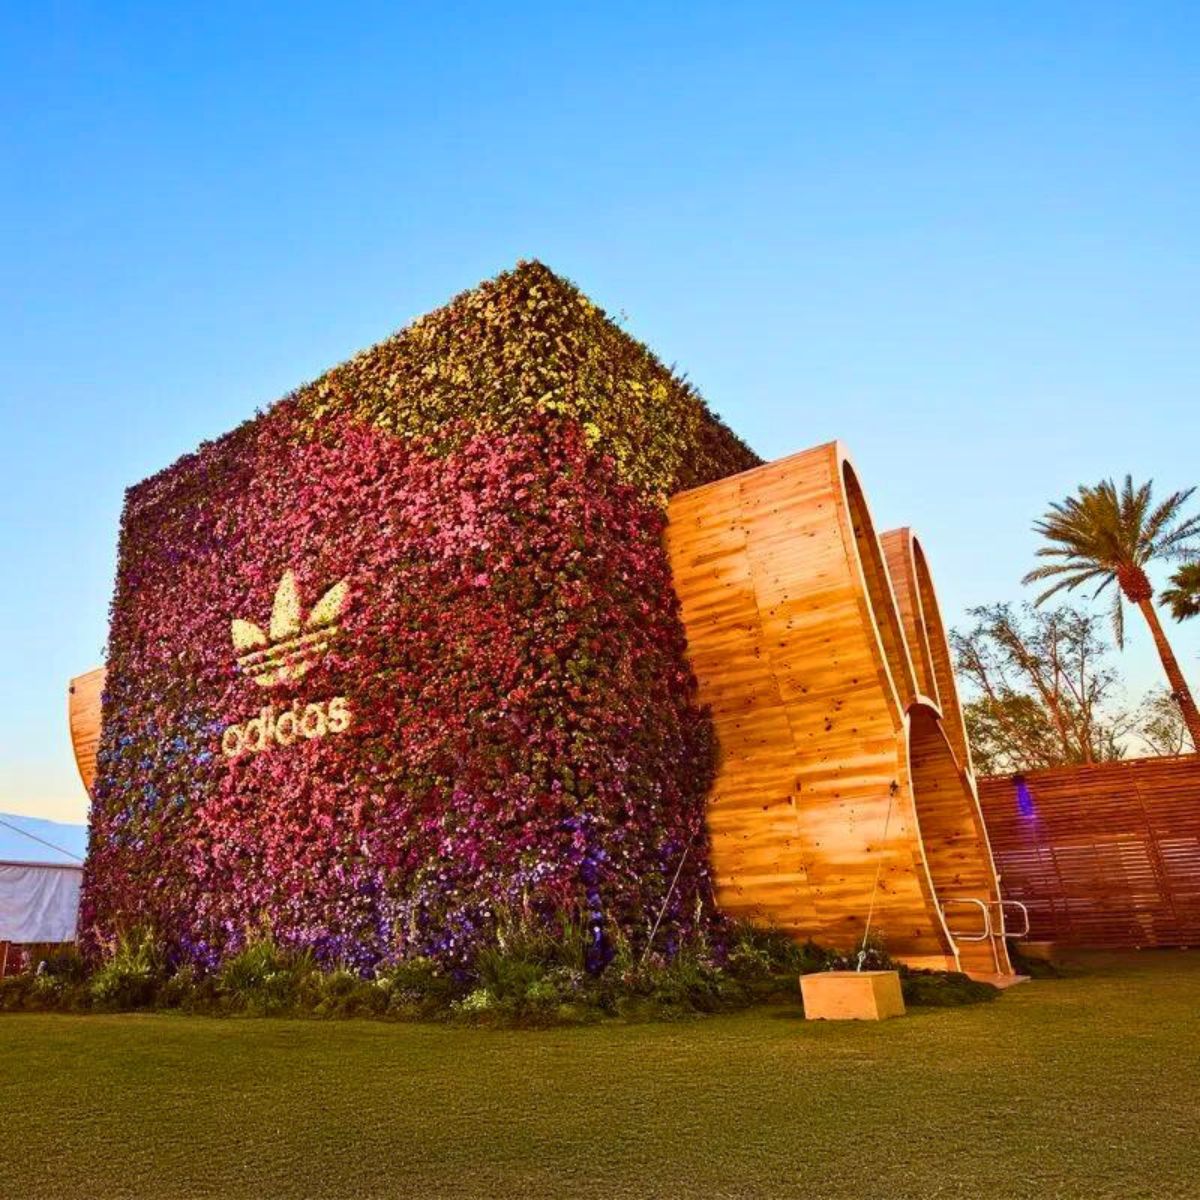 Cube installation with plants and flowers for Adidas